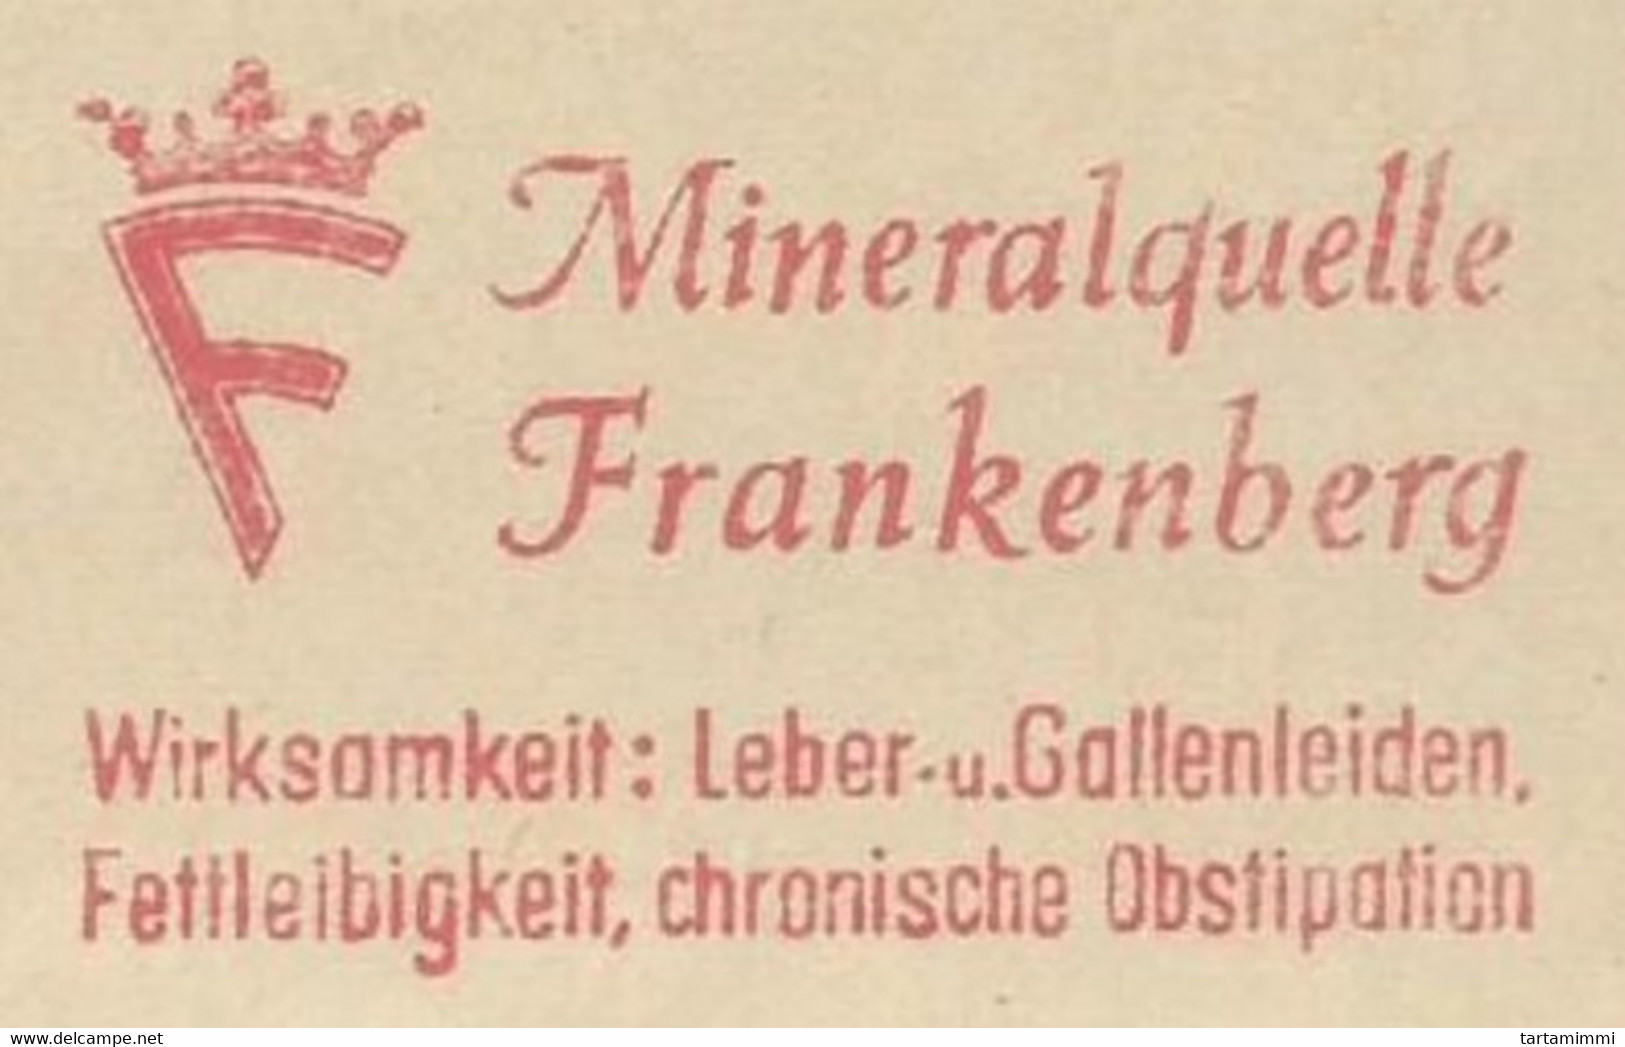 EMA METER STAMP FREISTEMPEL GERMANY 1963 MINERALQUELLE Naturally Springs That Produce Water-containing Minerals - Oblitérations & Flammes